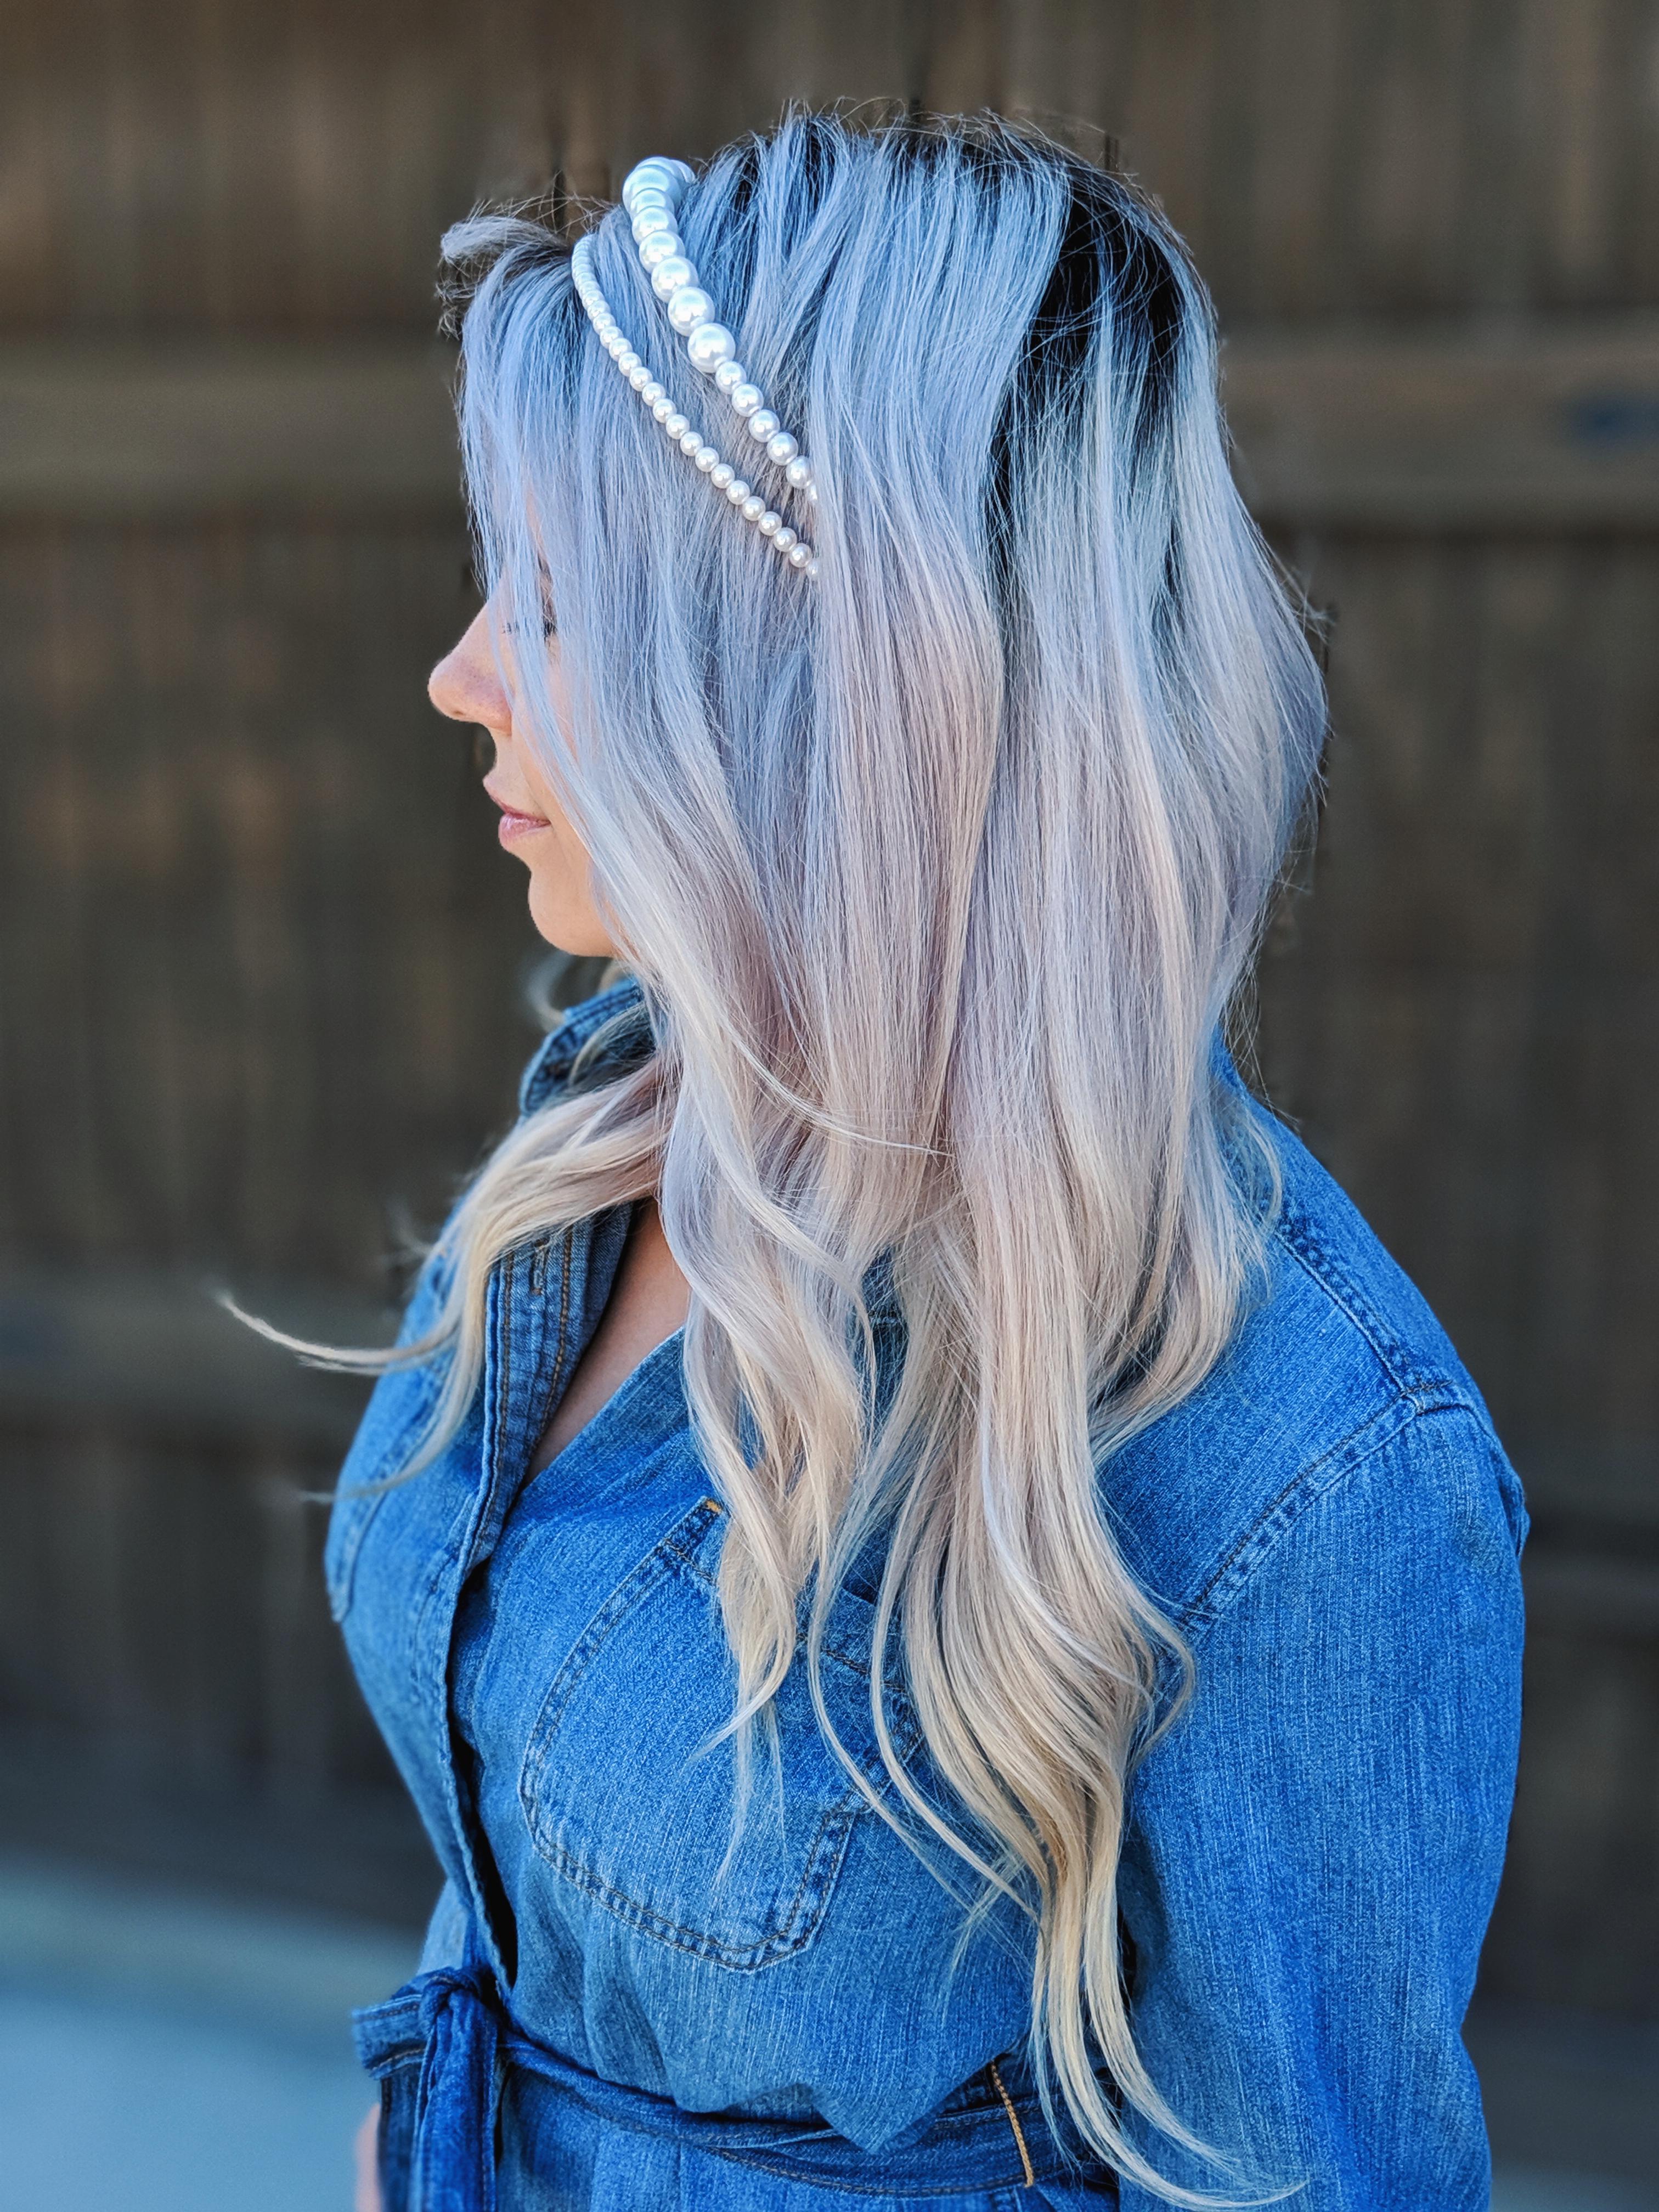 8 Types Of Cute And Easy Hair Styles For Jeans And Top With Long Hairs |...